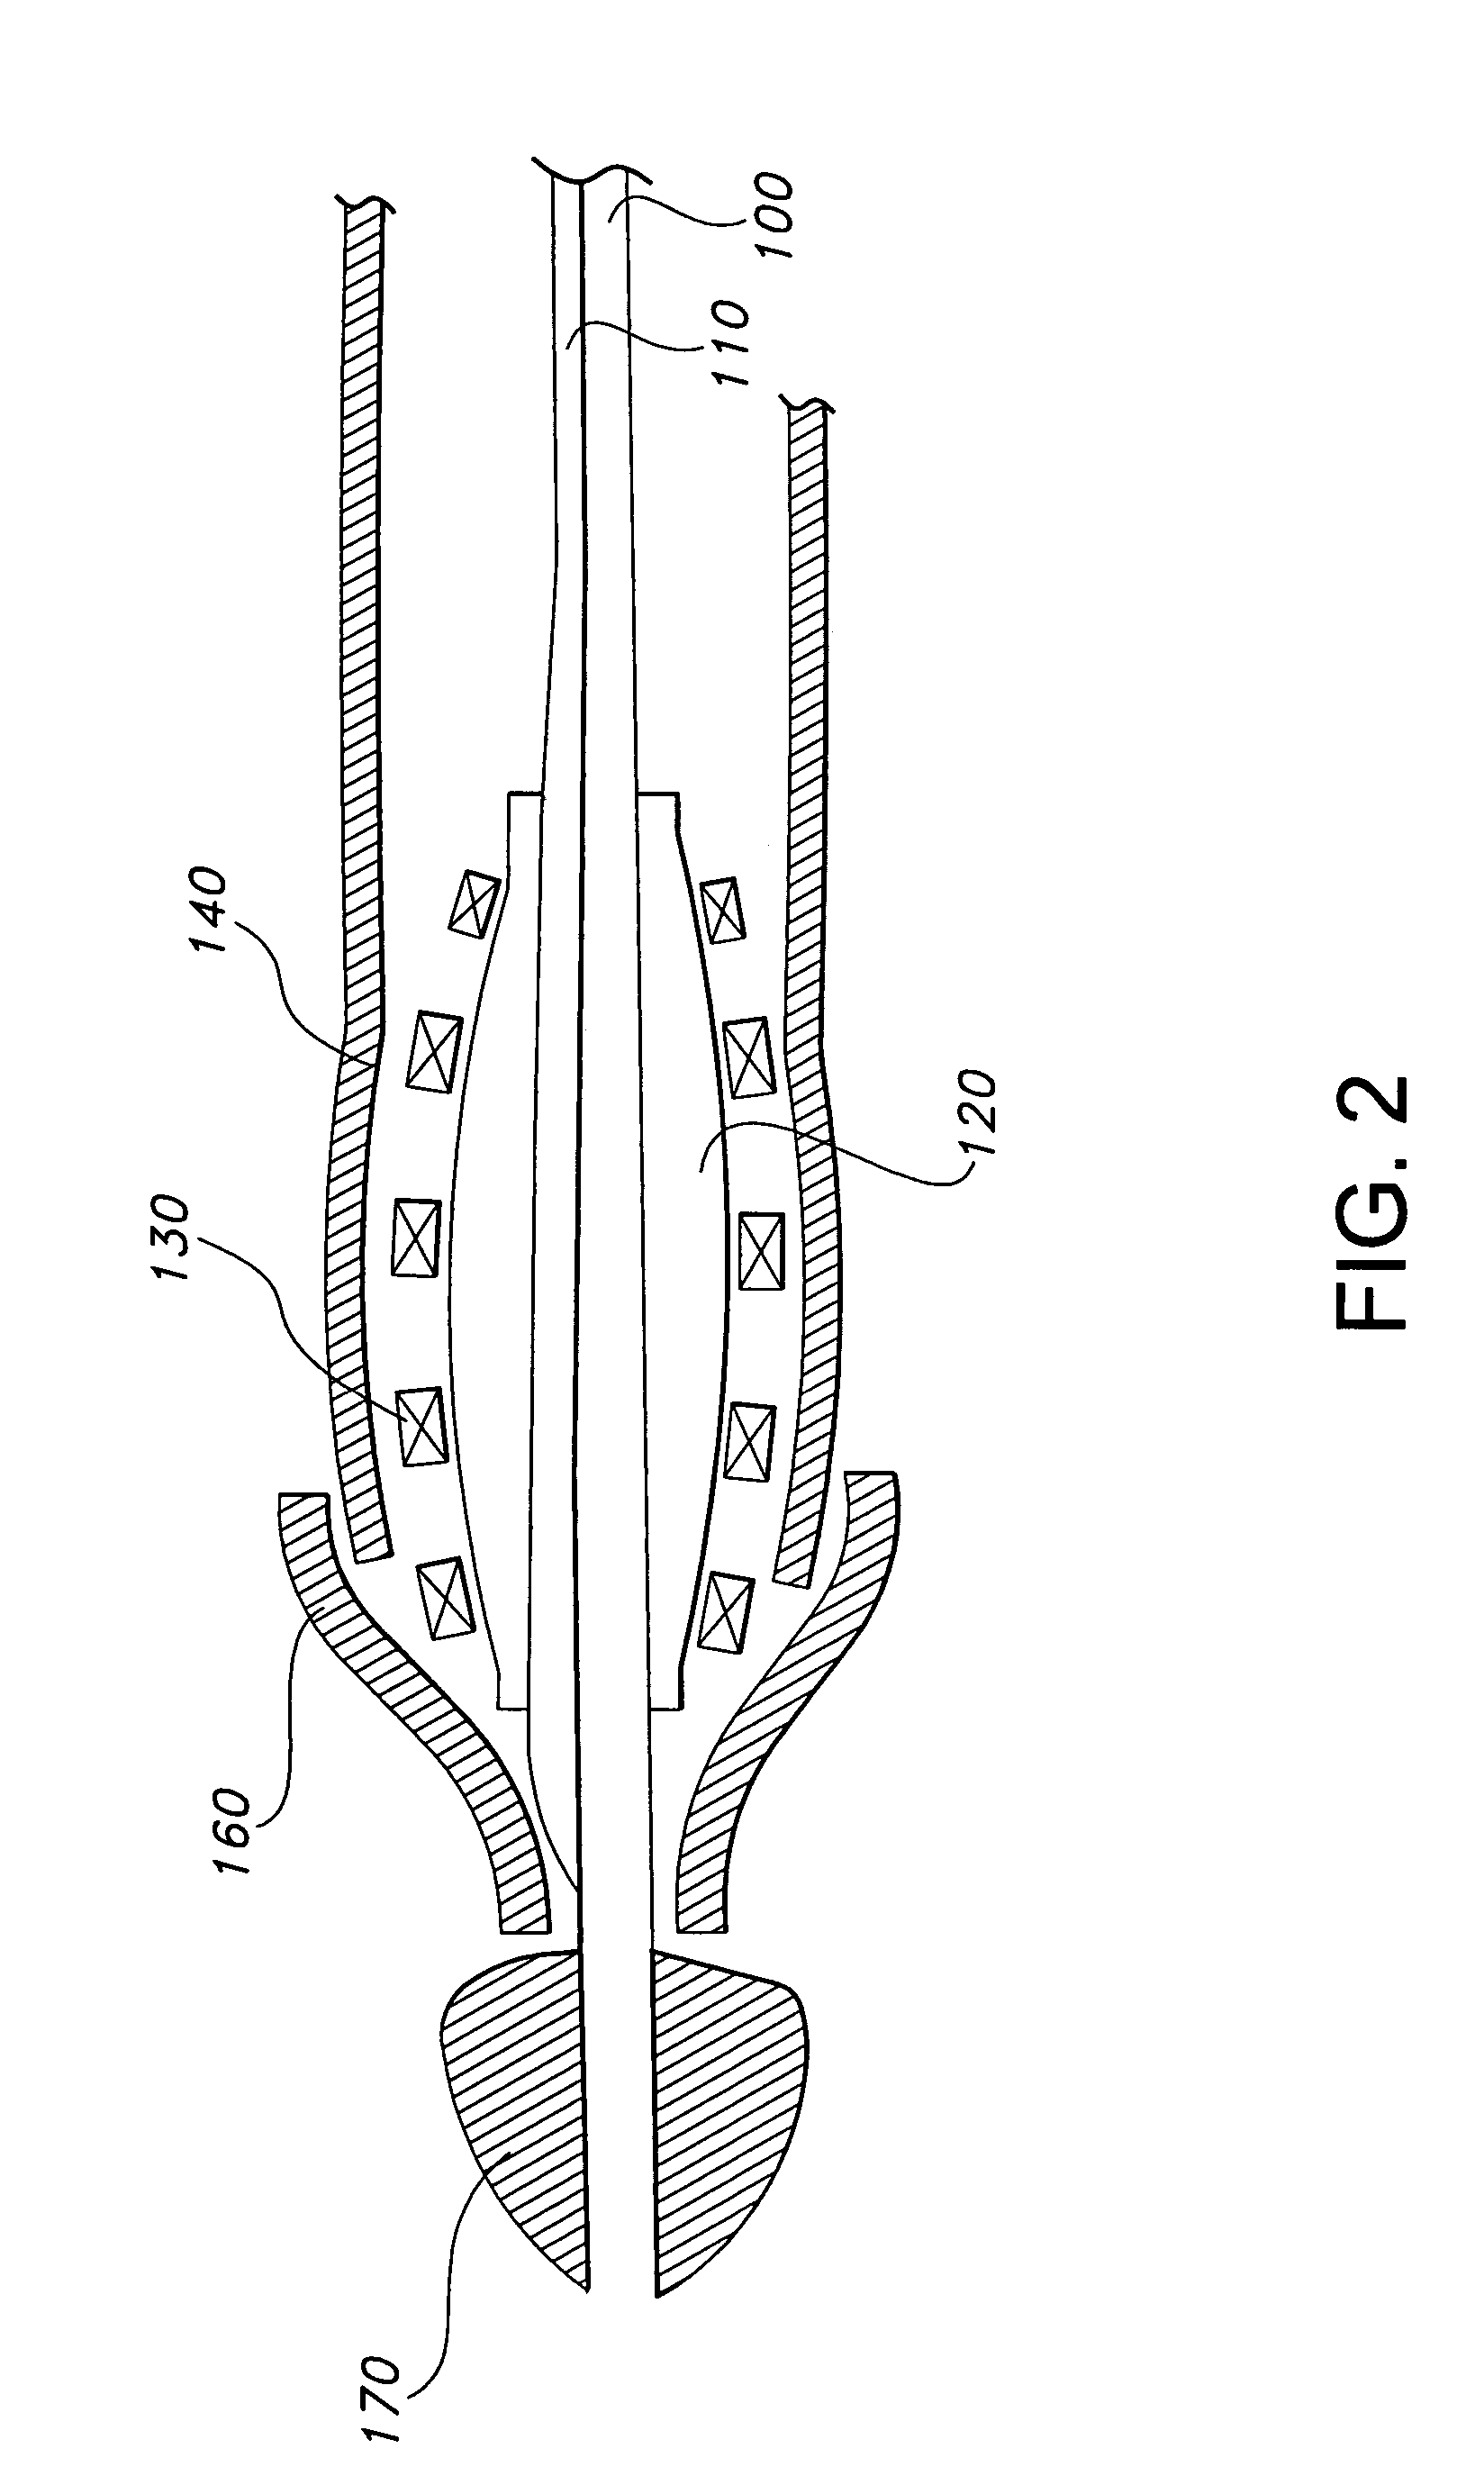 Method for inserting a prosthesis